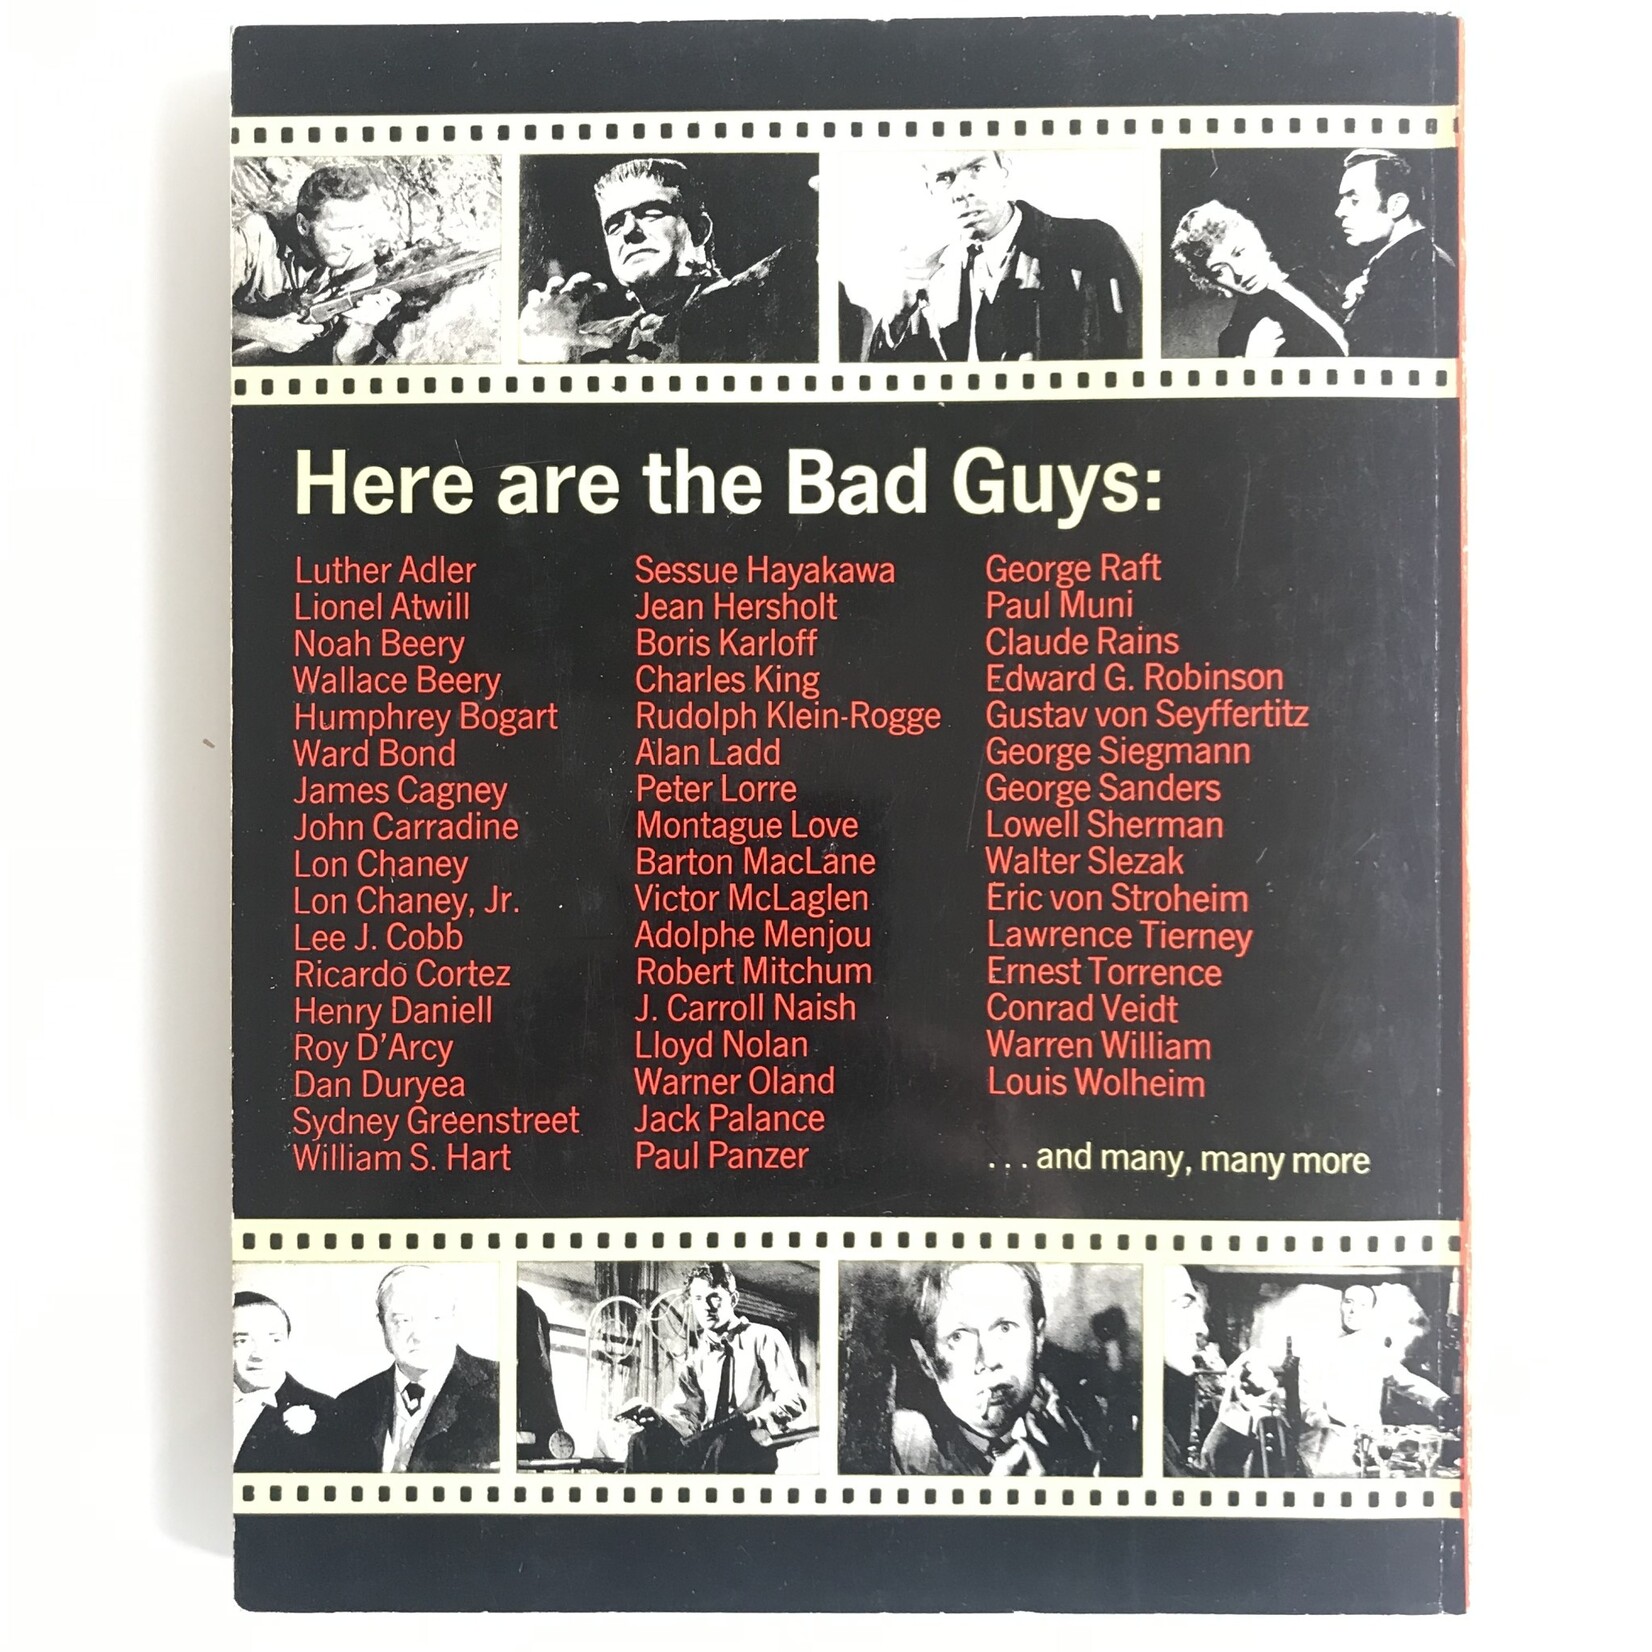 William K. Everson - The Bad Guys: A Pictorial History Of The Movie Villain - Paperback (USED)